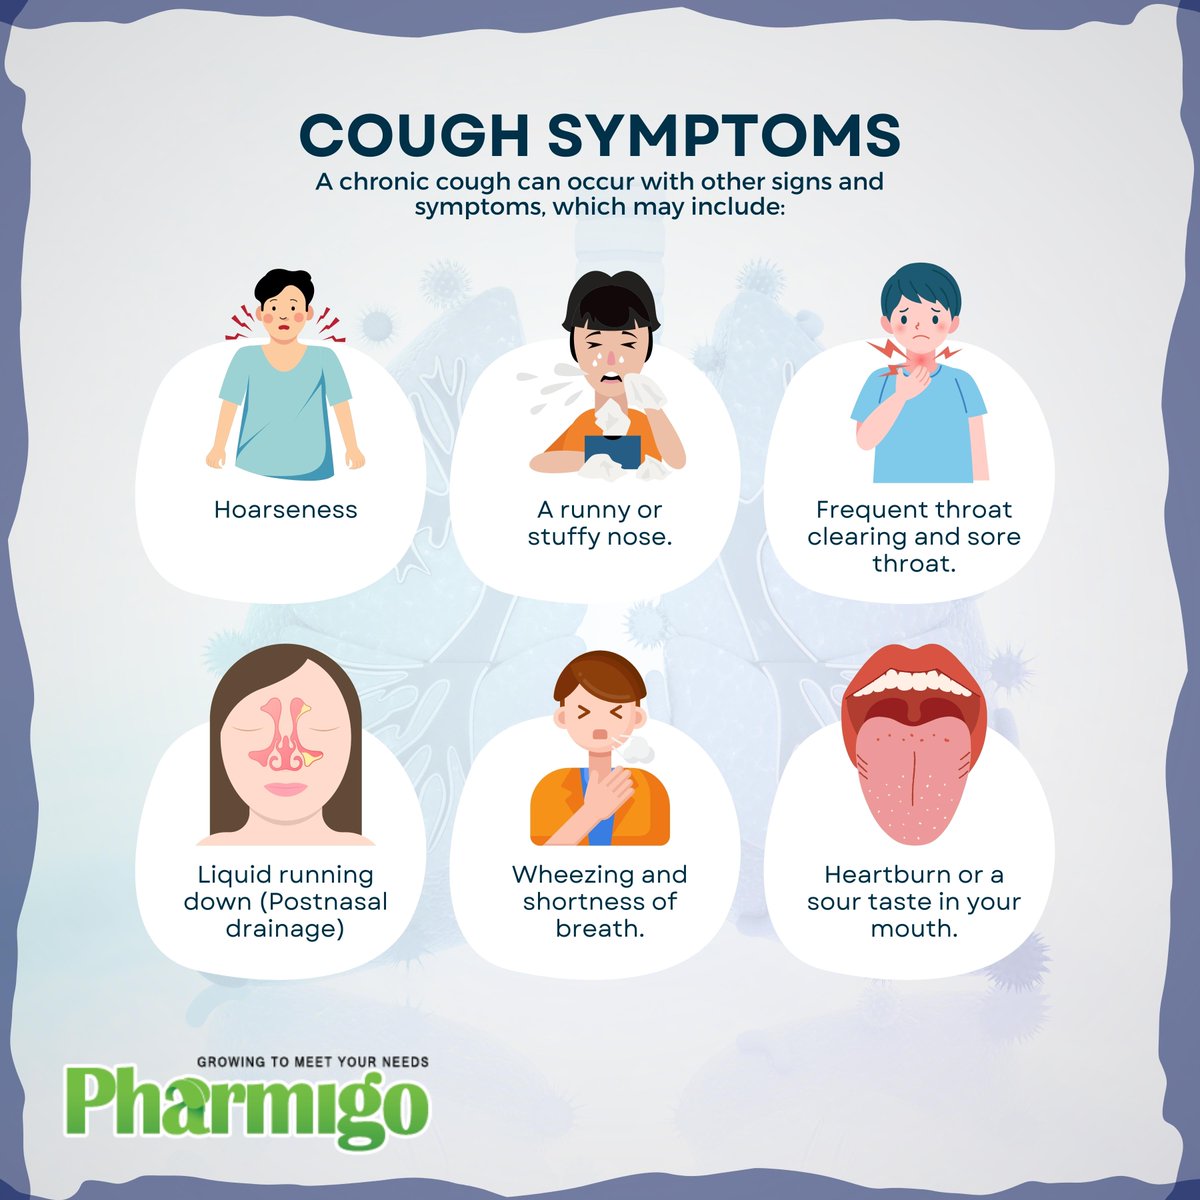 'Silence the Cough Symptoms, Embrace Relief.'

#CoughSymptoms #CoughRelief #HealthyBreathing #ColdandFlu #RespiratoryHealth #CoughRemedies #WellnessJourney #StayHealthy #CoughAwareness
#BreatheEasy #RespiratoryCare #FeelBetter #StayHydrated #CoughManagement
#HealthMatters